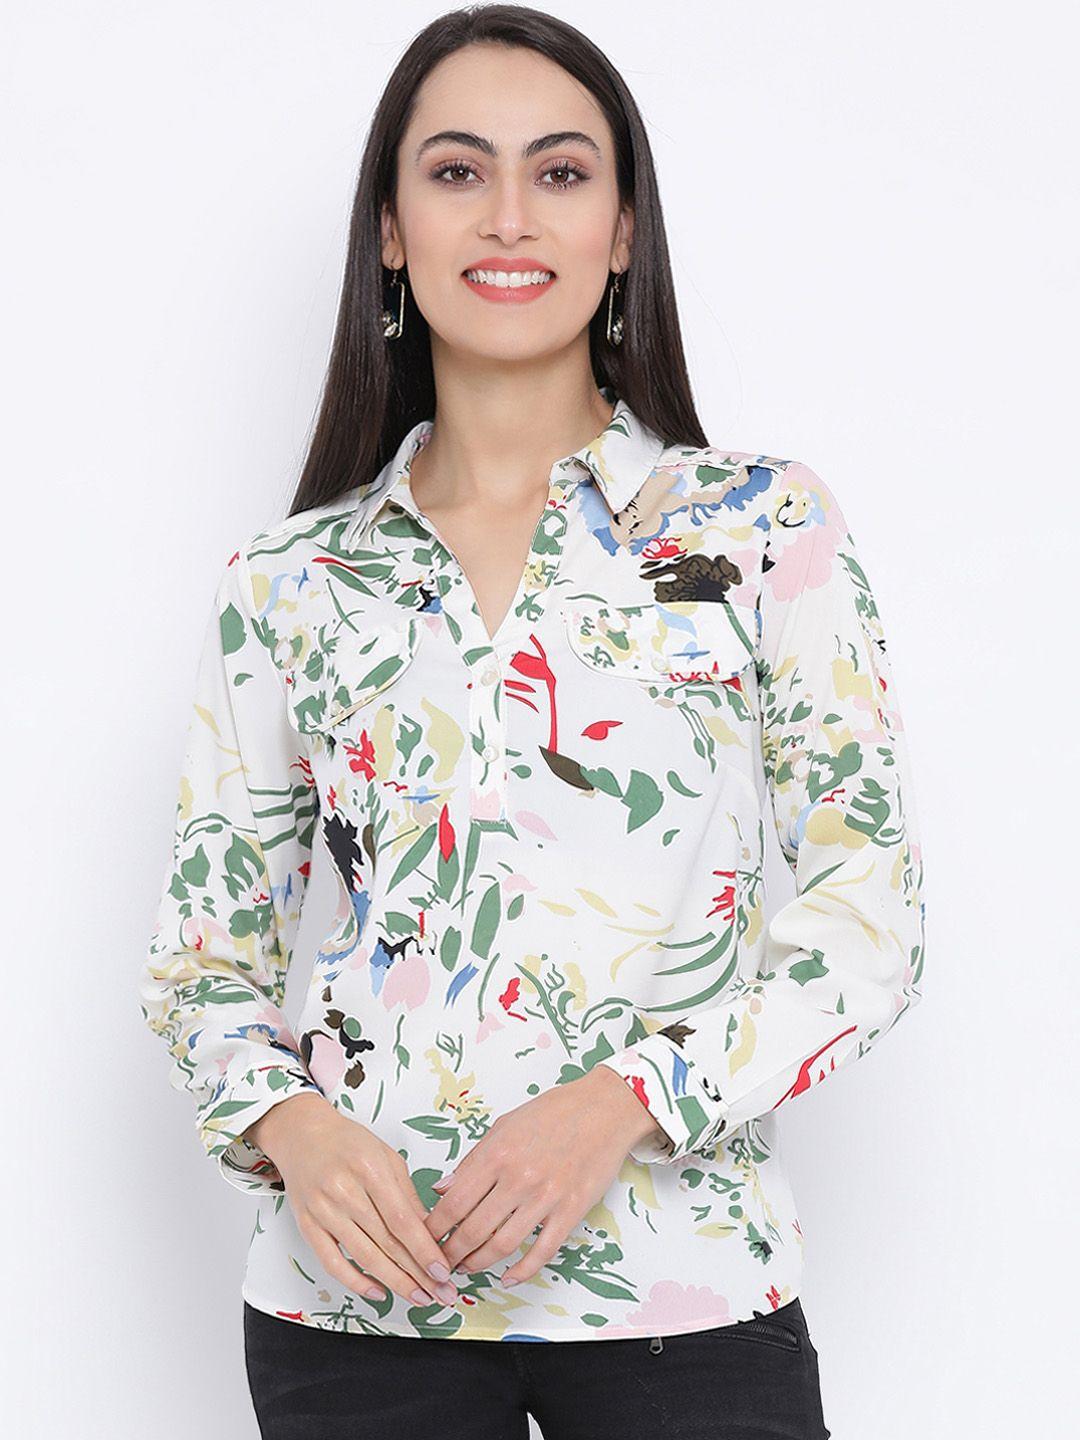 oxolloxo women off-white printed shirt style top